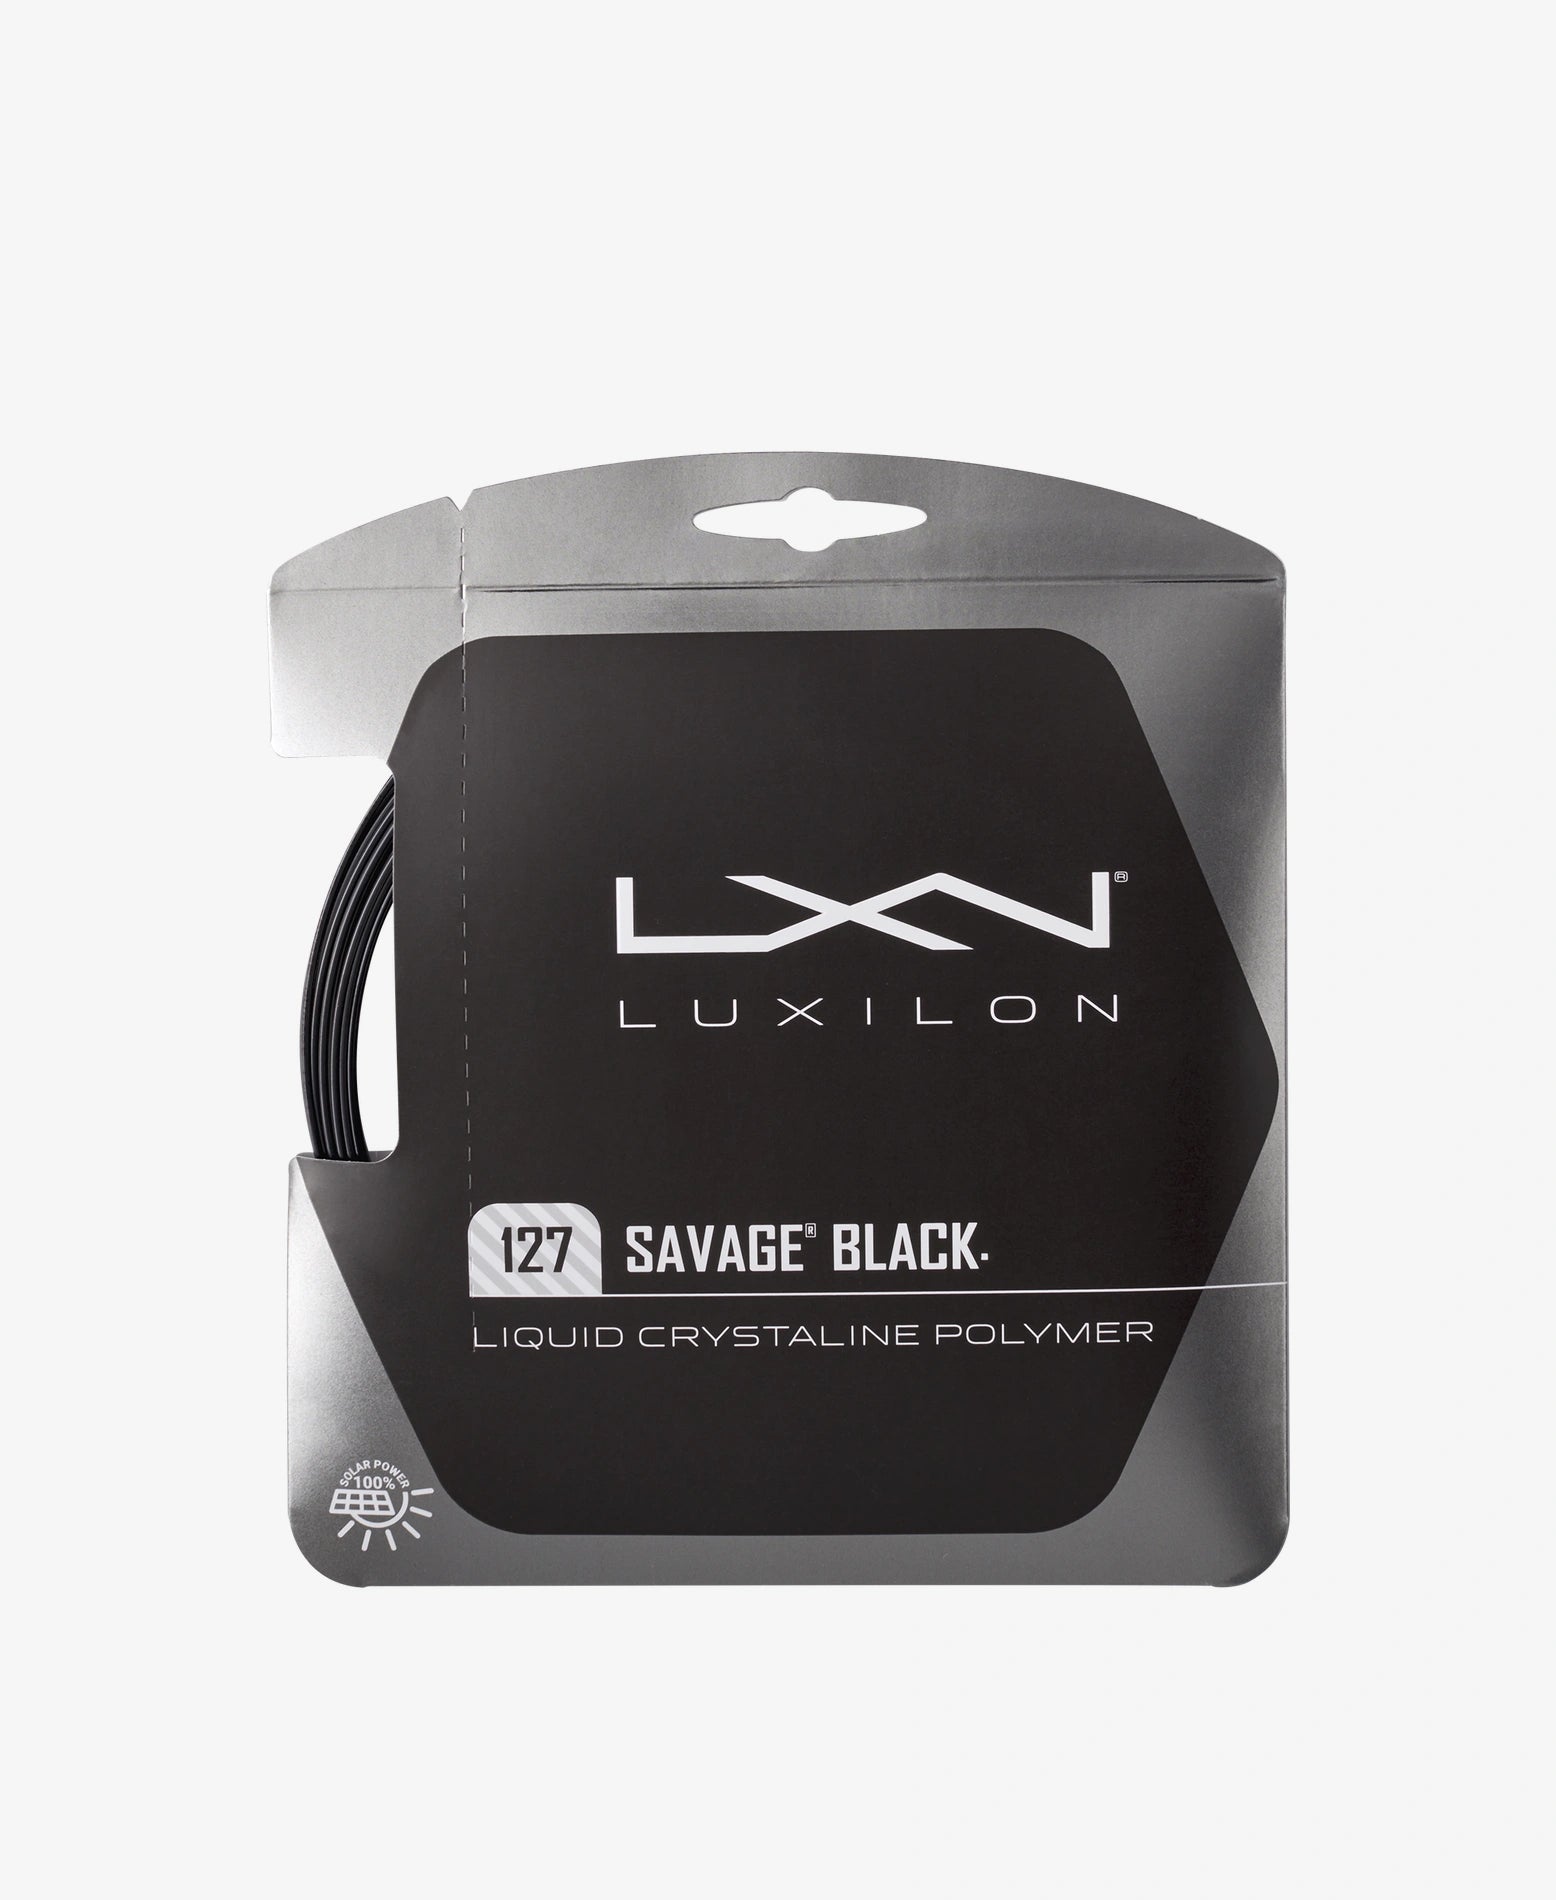 A set of Luxilon Savage 127 Tennis String in black available for sale at GSM Sports.    